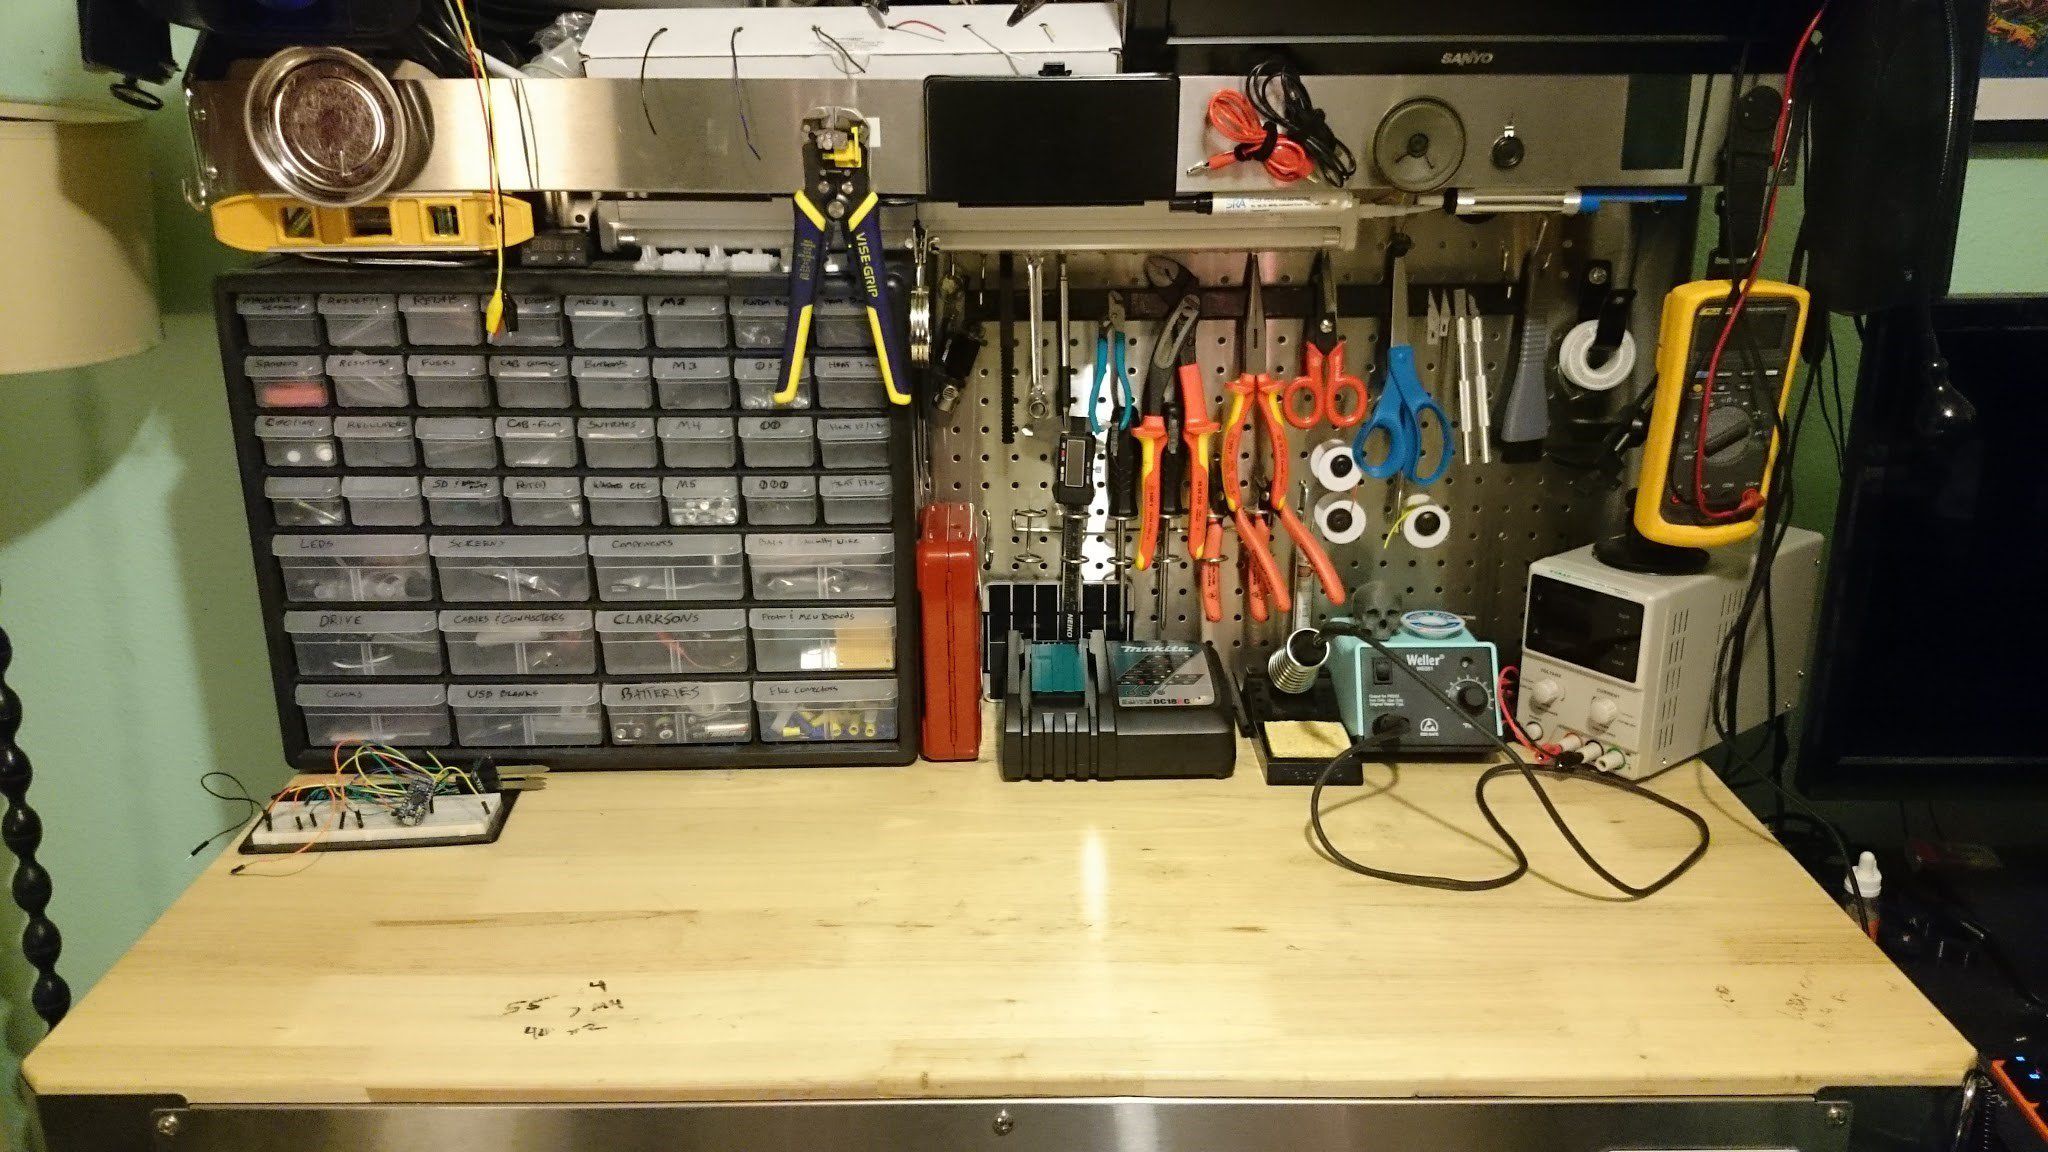 Six Hacks for Organizing Your Messy Workbench